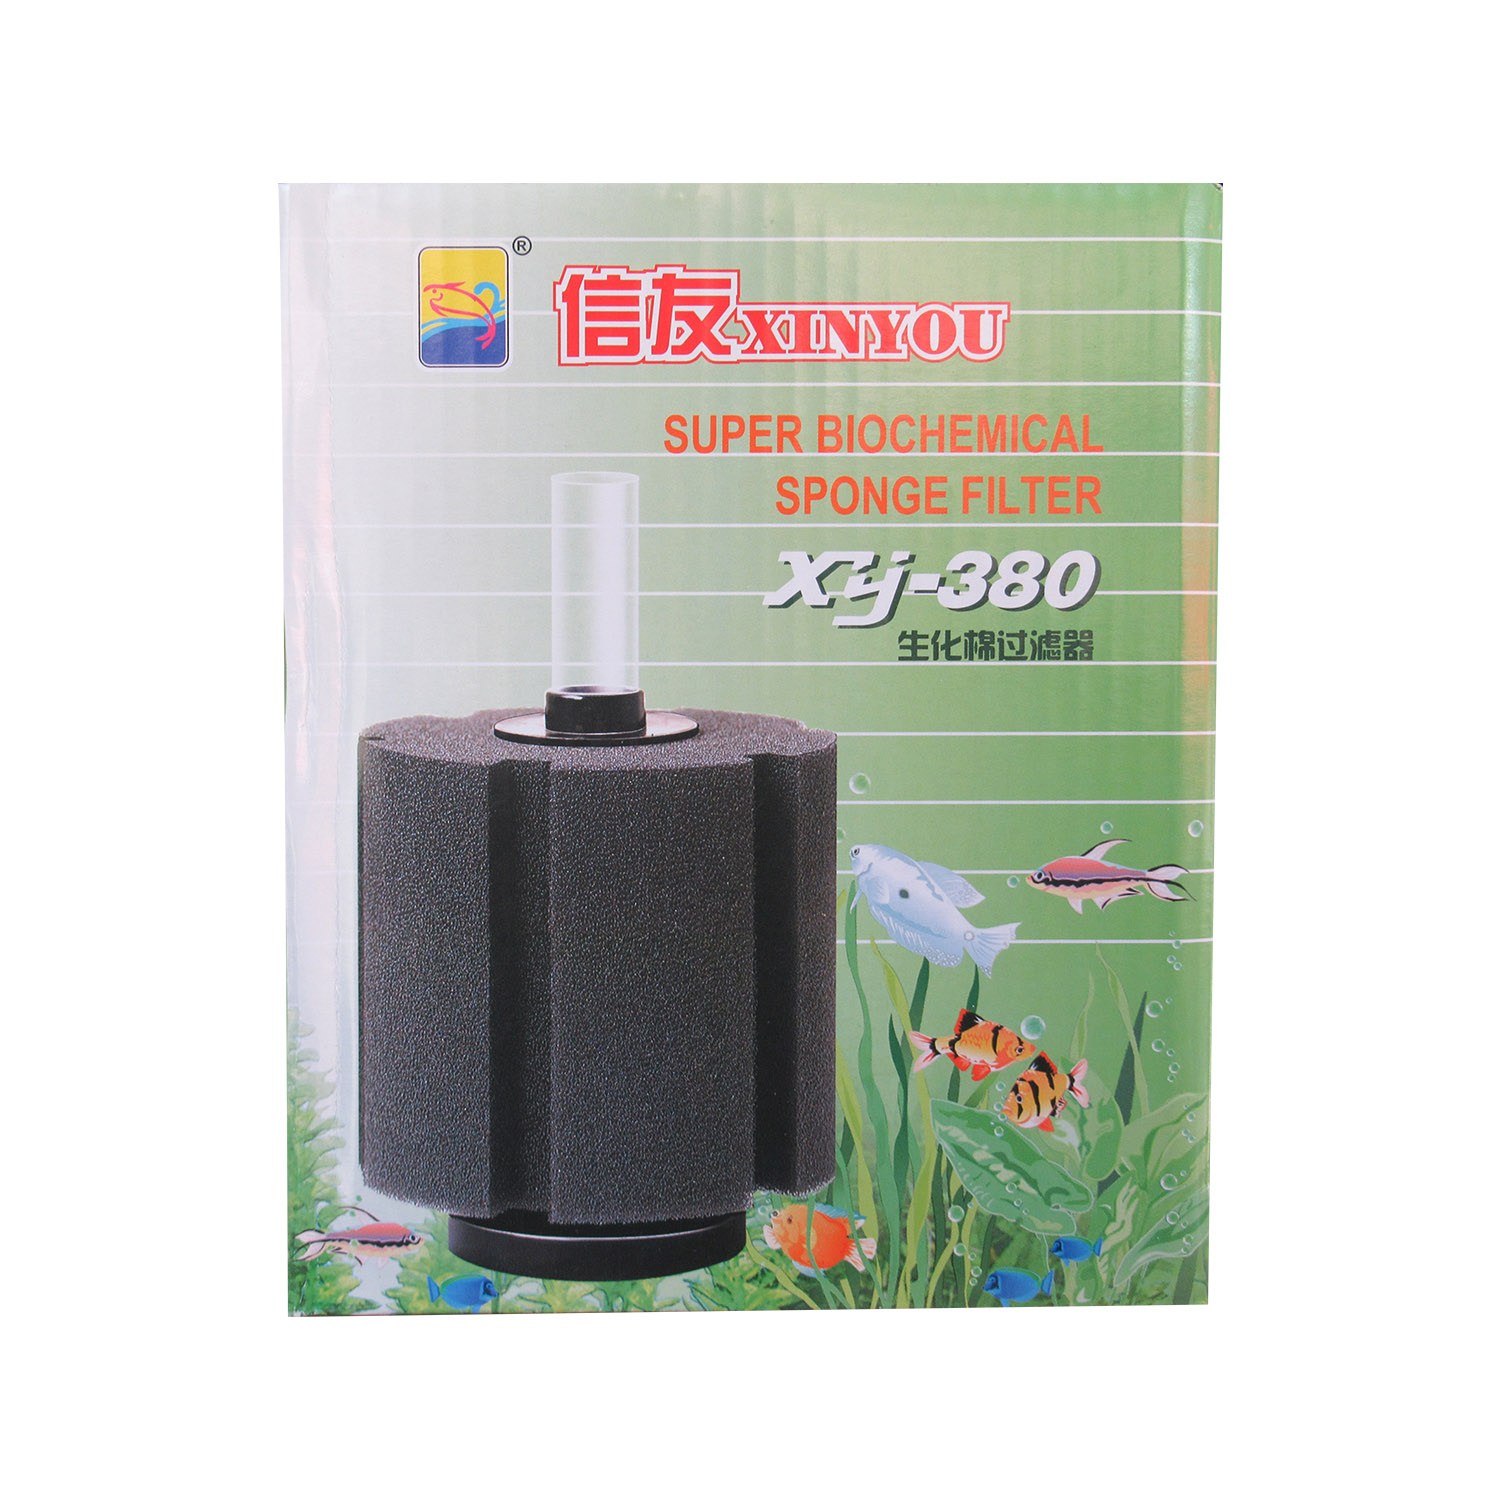 Buy Xinyou Super Biochemical Sponge Filter XY-380 Online at Best Price ...